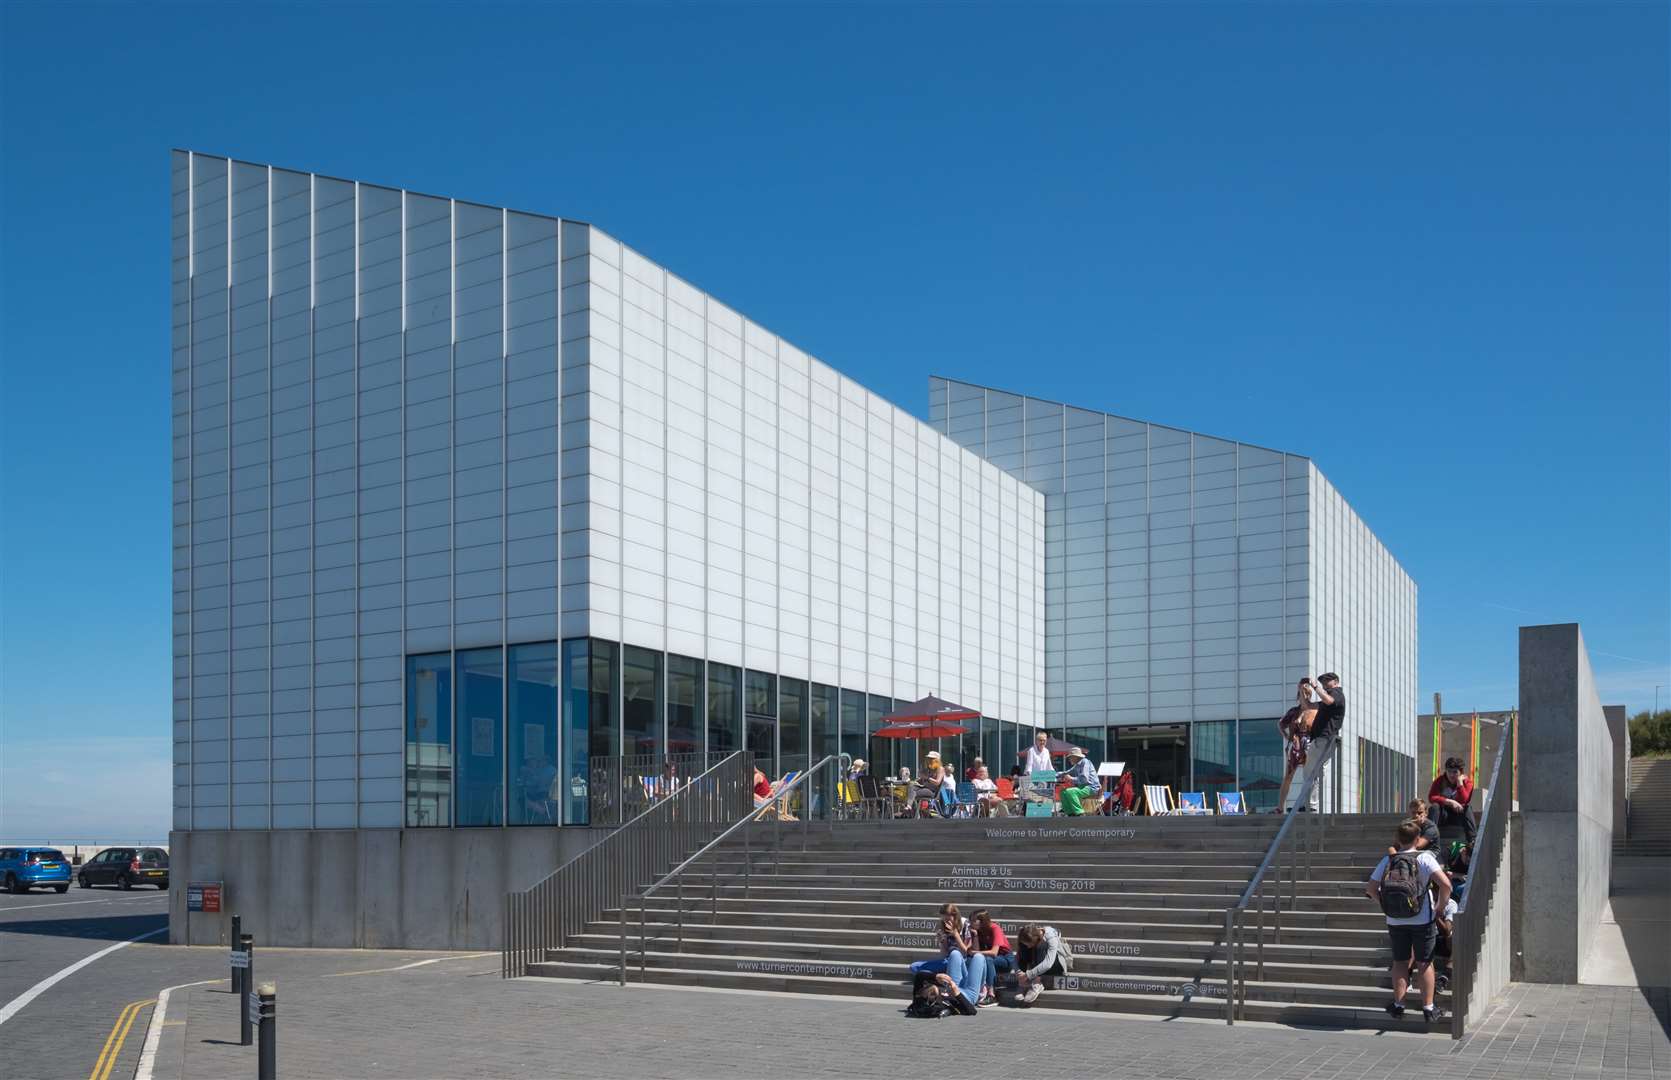 Turner Contemporary is set to close